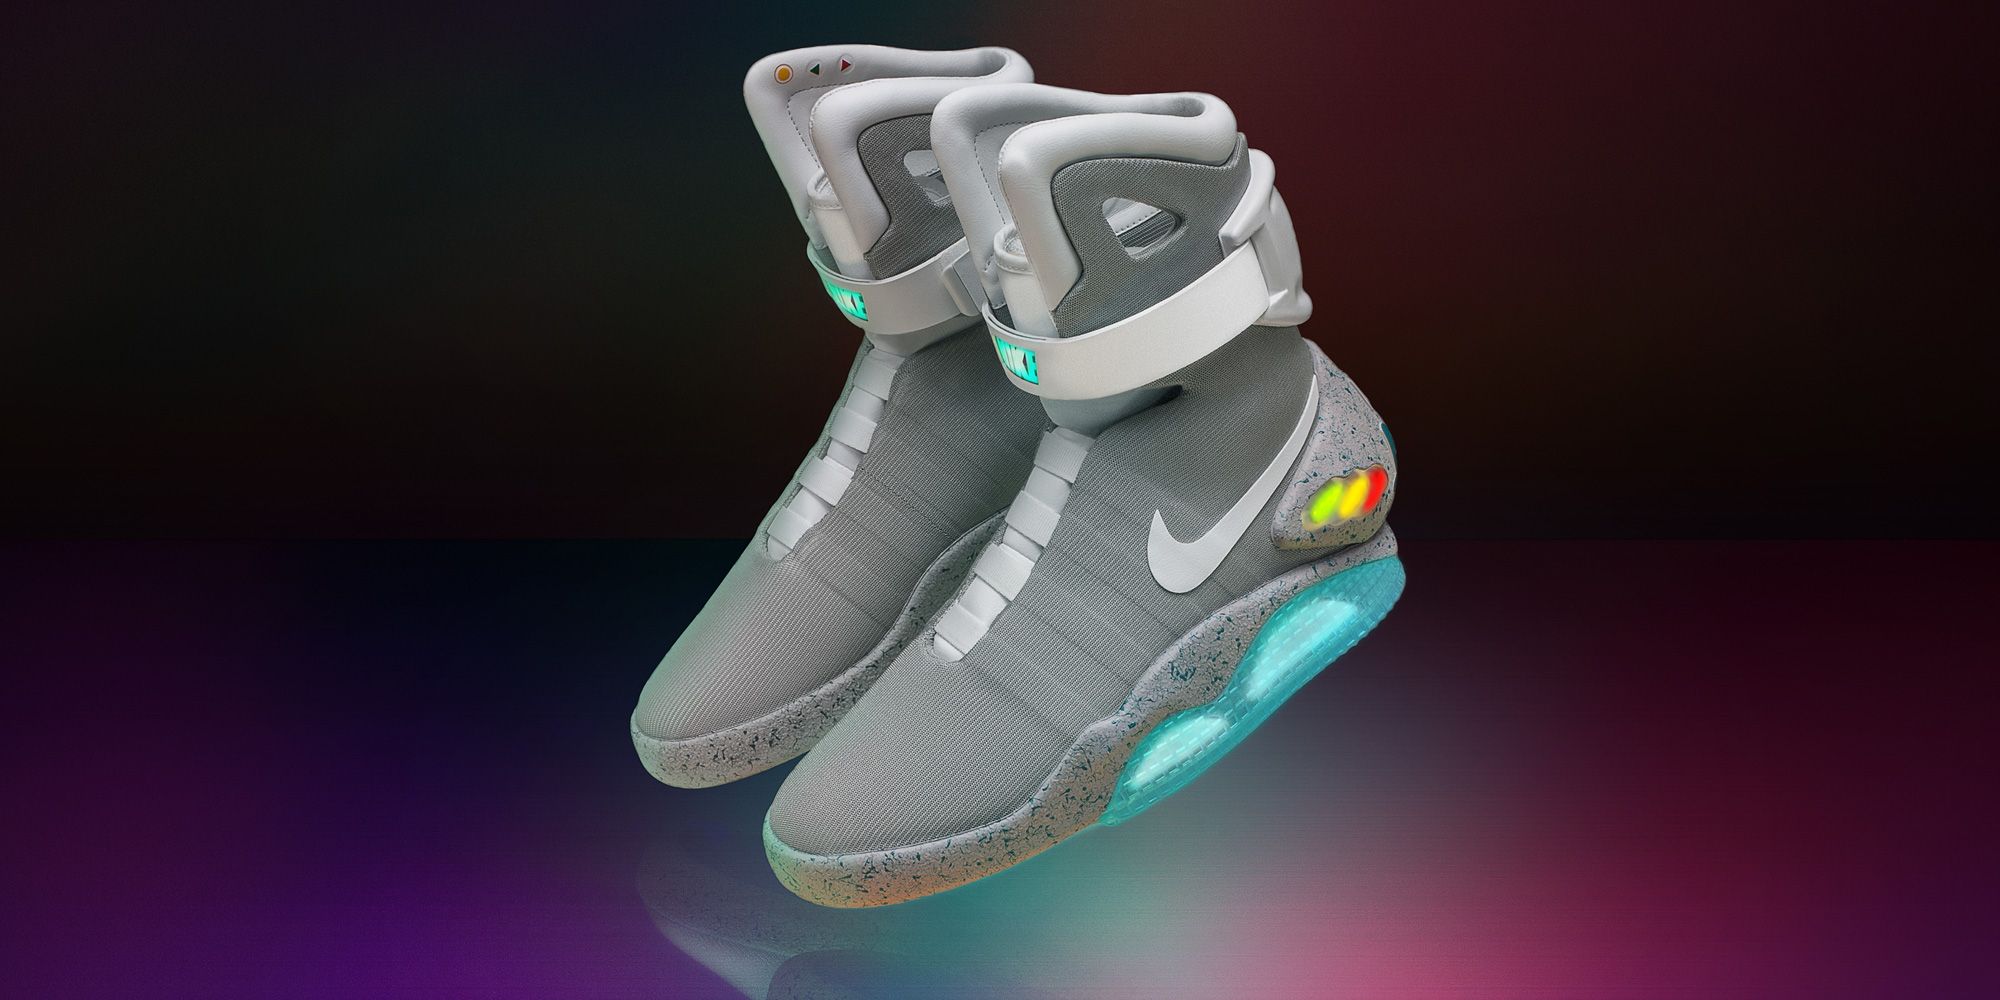 Nike Mag with Laces Online Drawing - to Enter the Self-Lacing 'Back to the Future' Auction